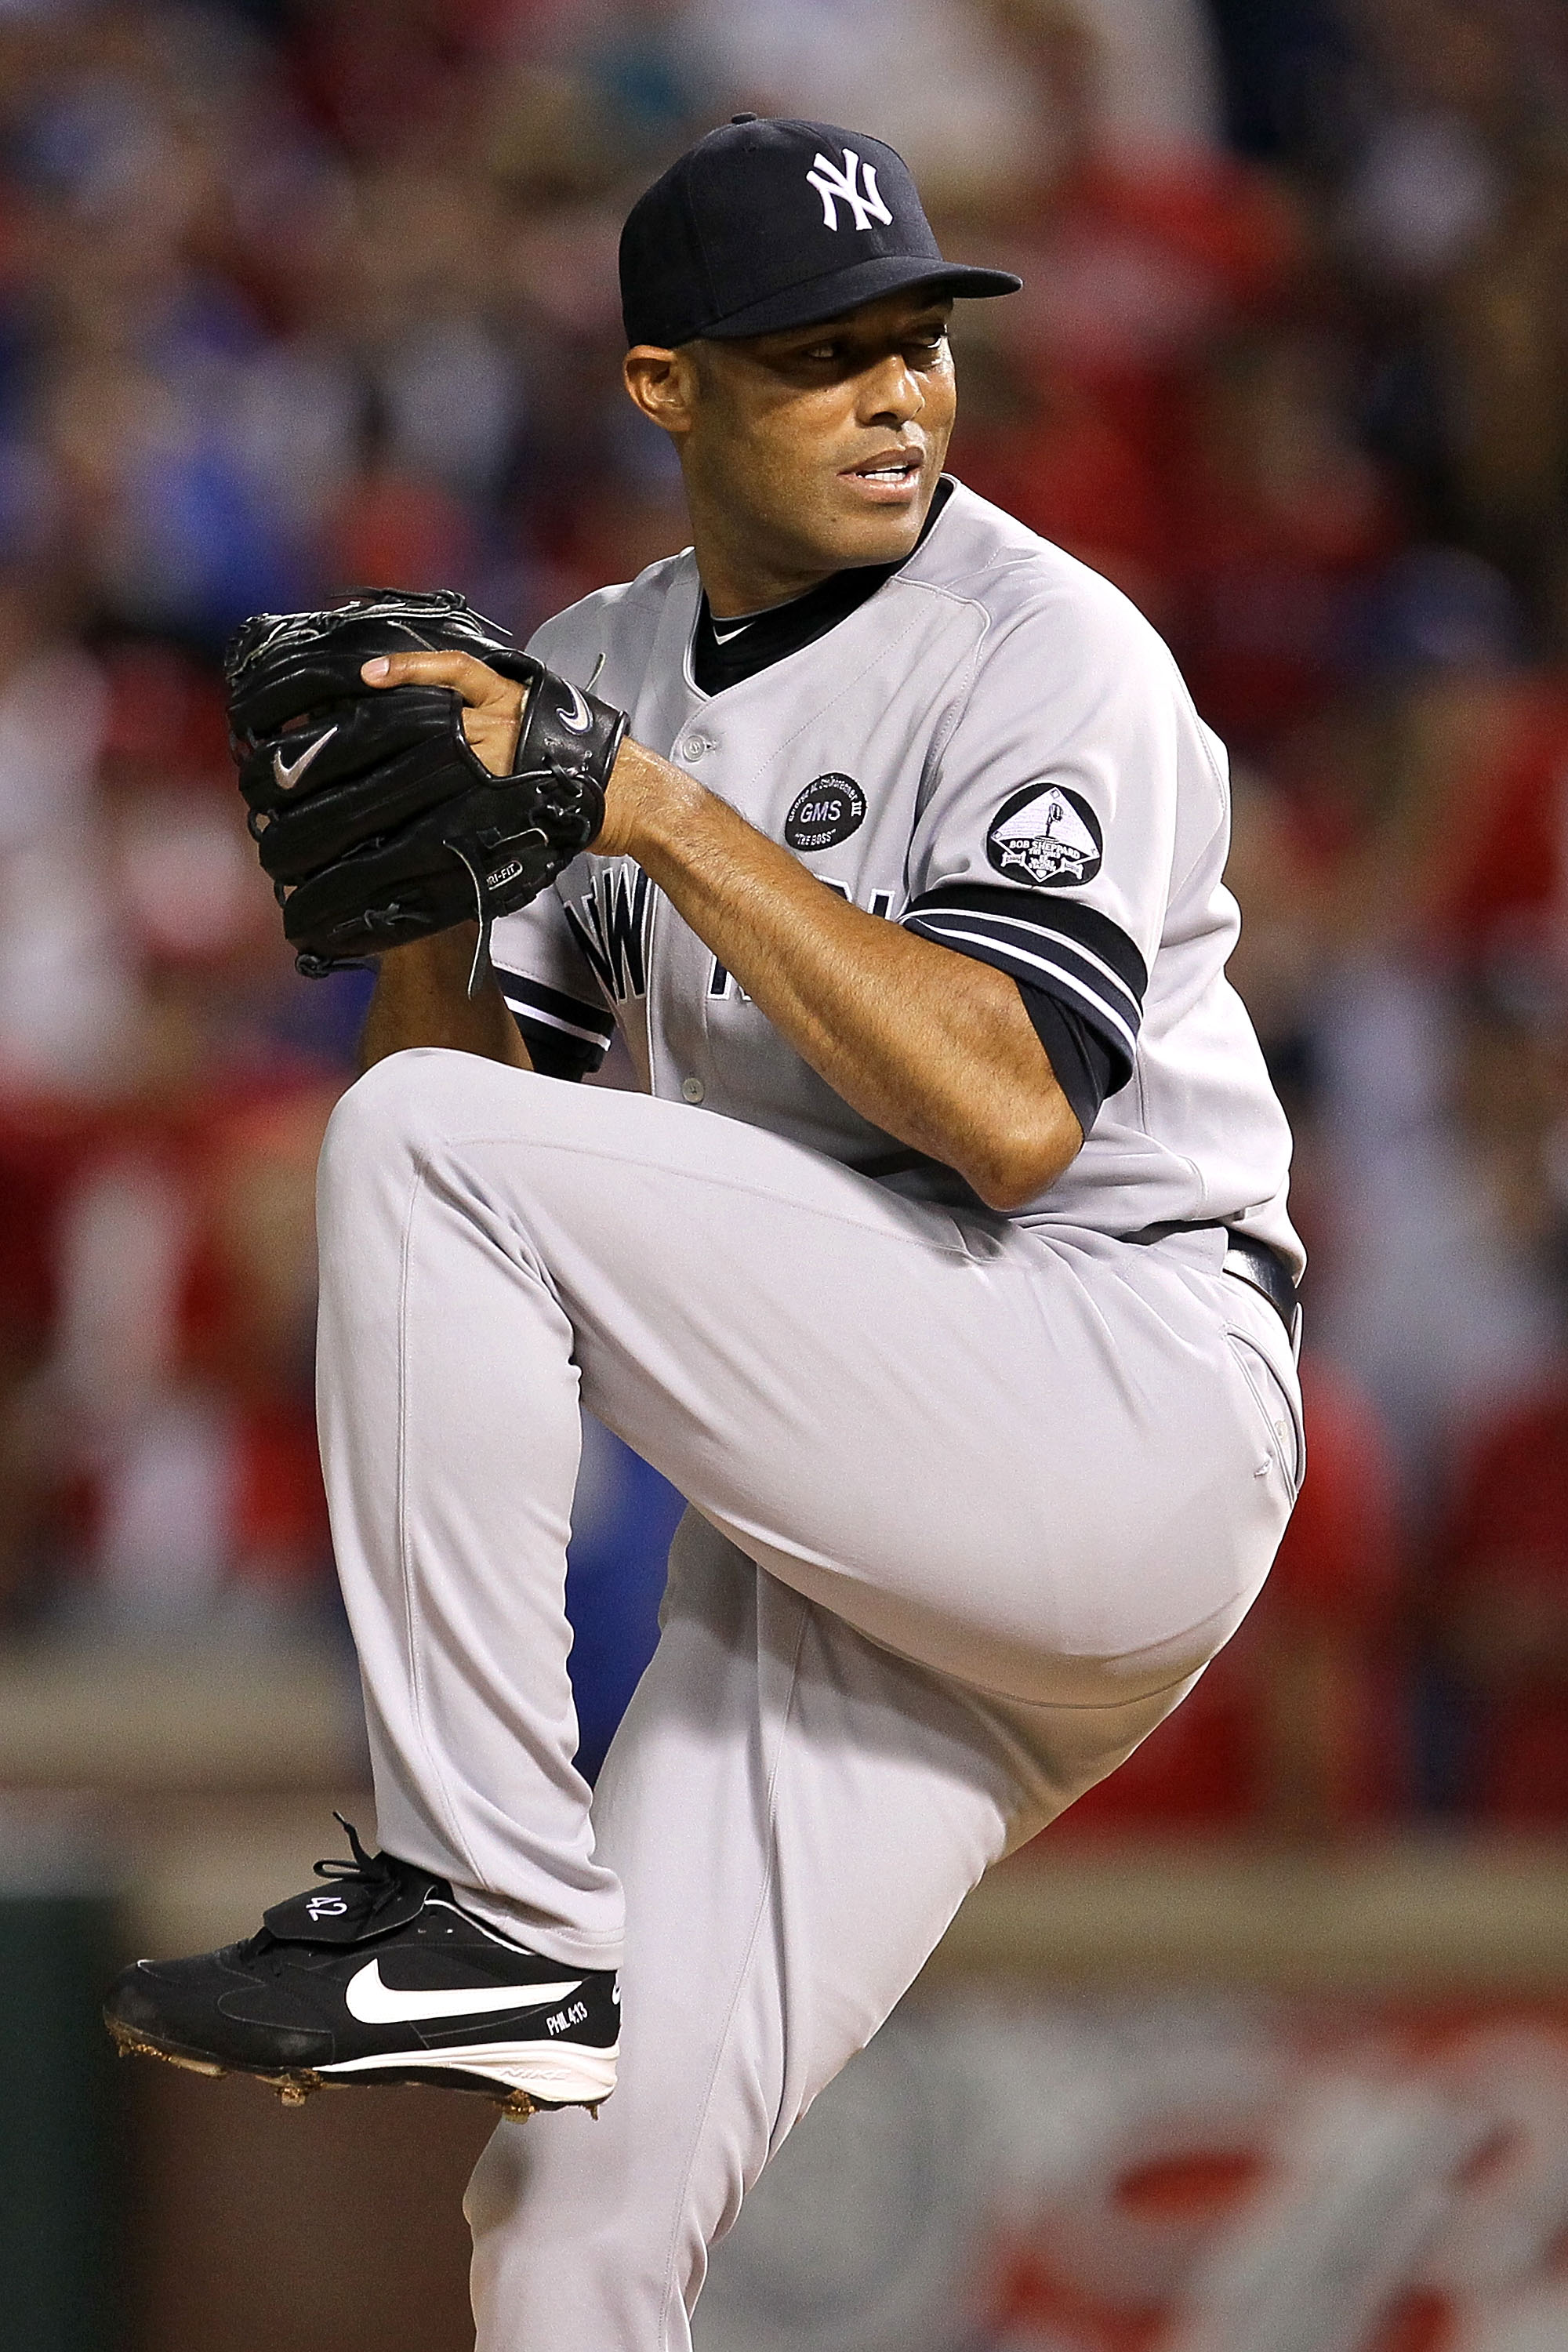 Where Does Mariano Rivera Rank Among the Greatest Pitchers of the